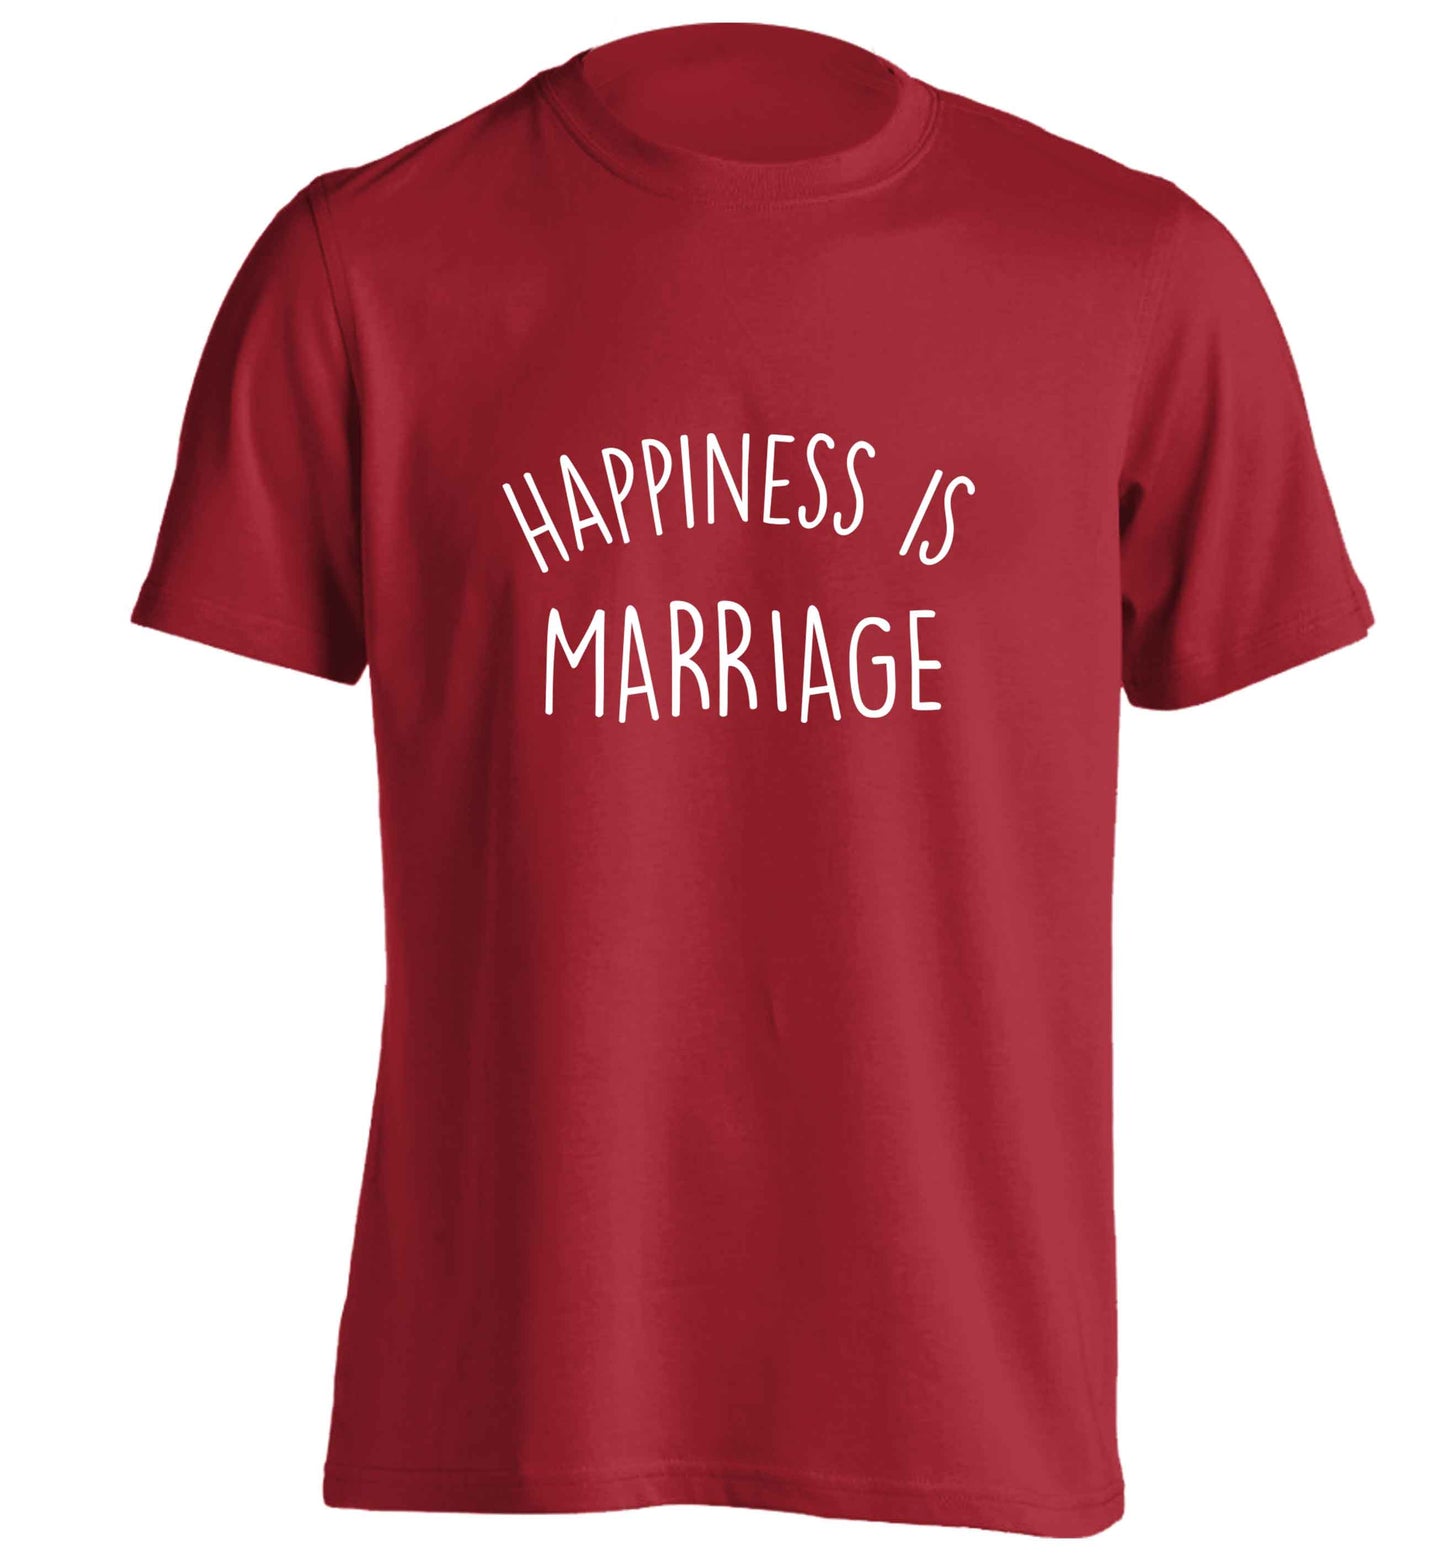 Happiness is wedding planning adults unisex red Tshirt 2XL